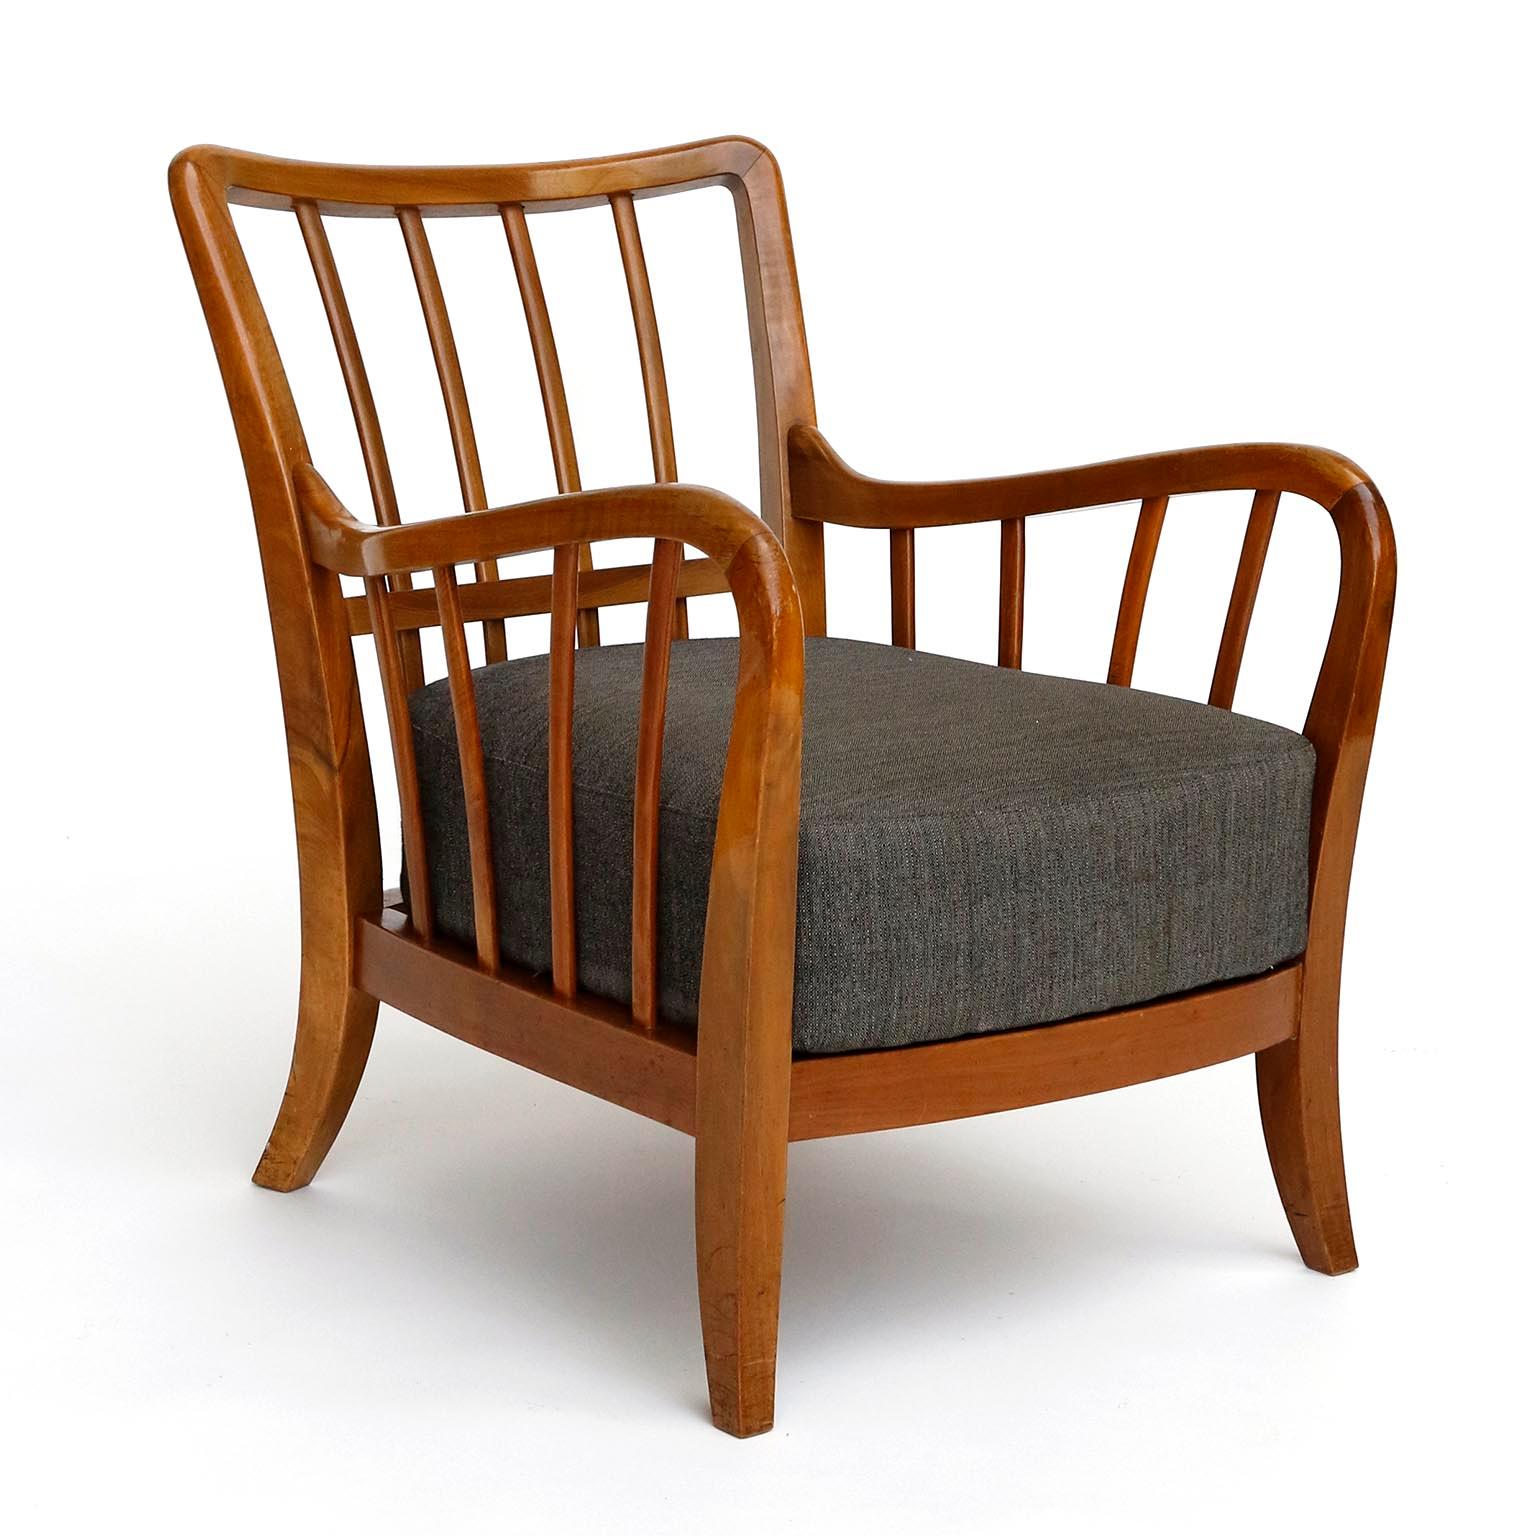 Seette Bench Seat Attributed to Josef Frank, Walnut Wood, Thonet, 1940 7